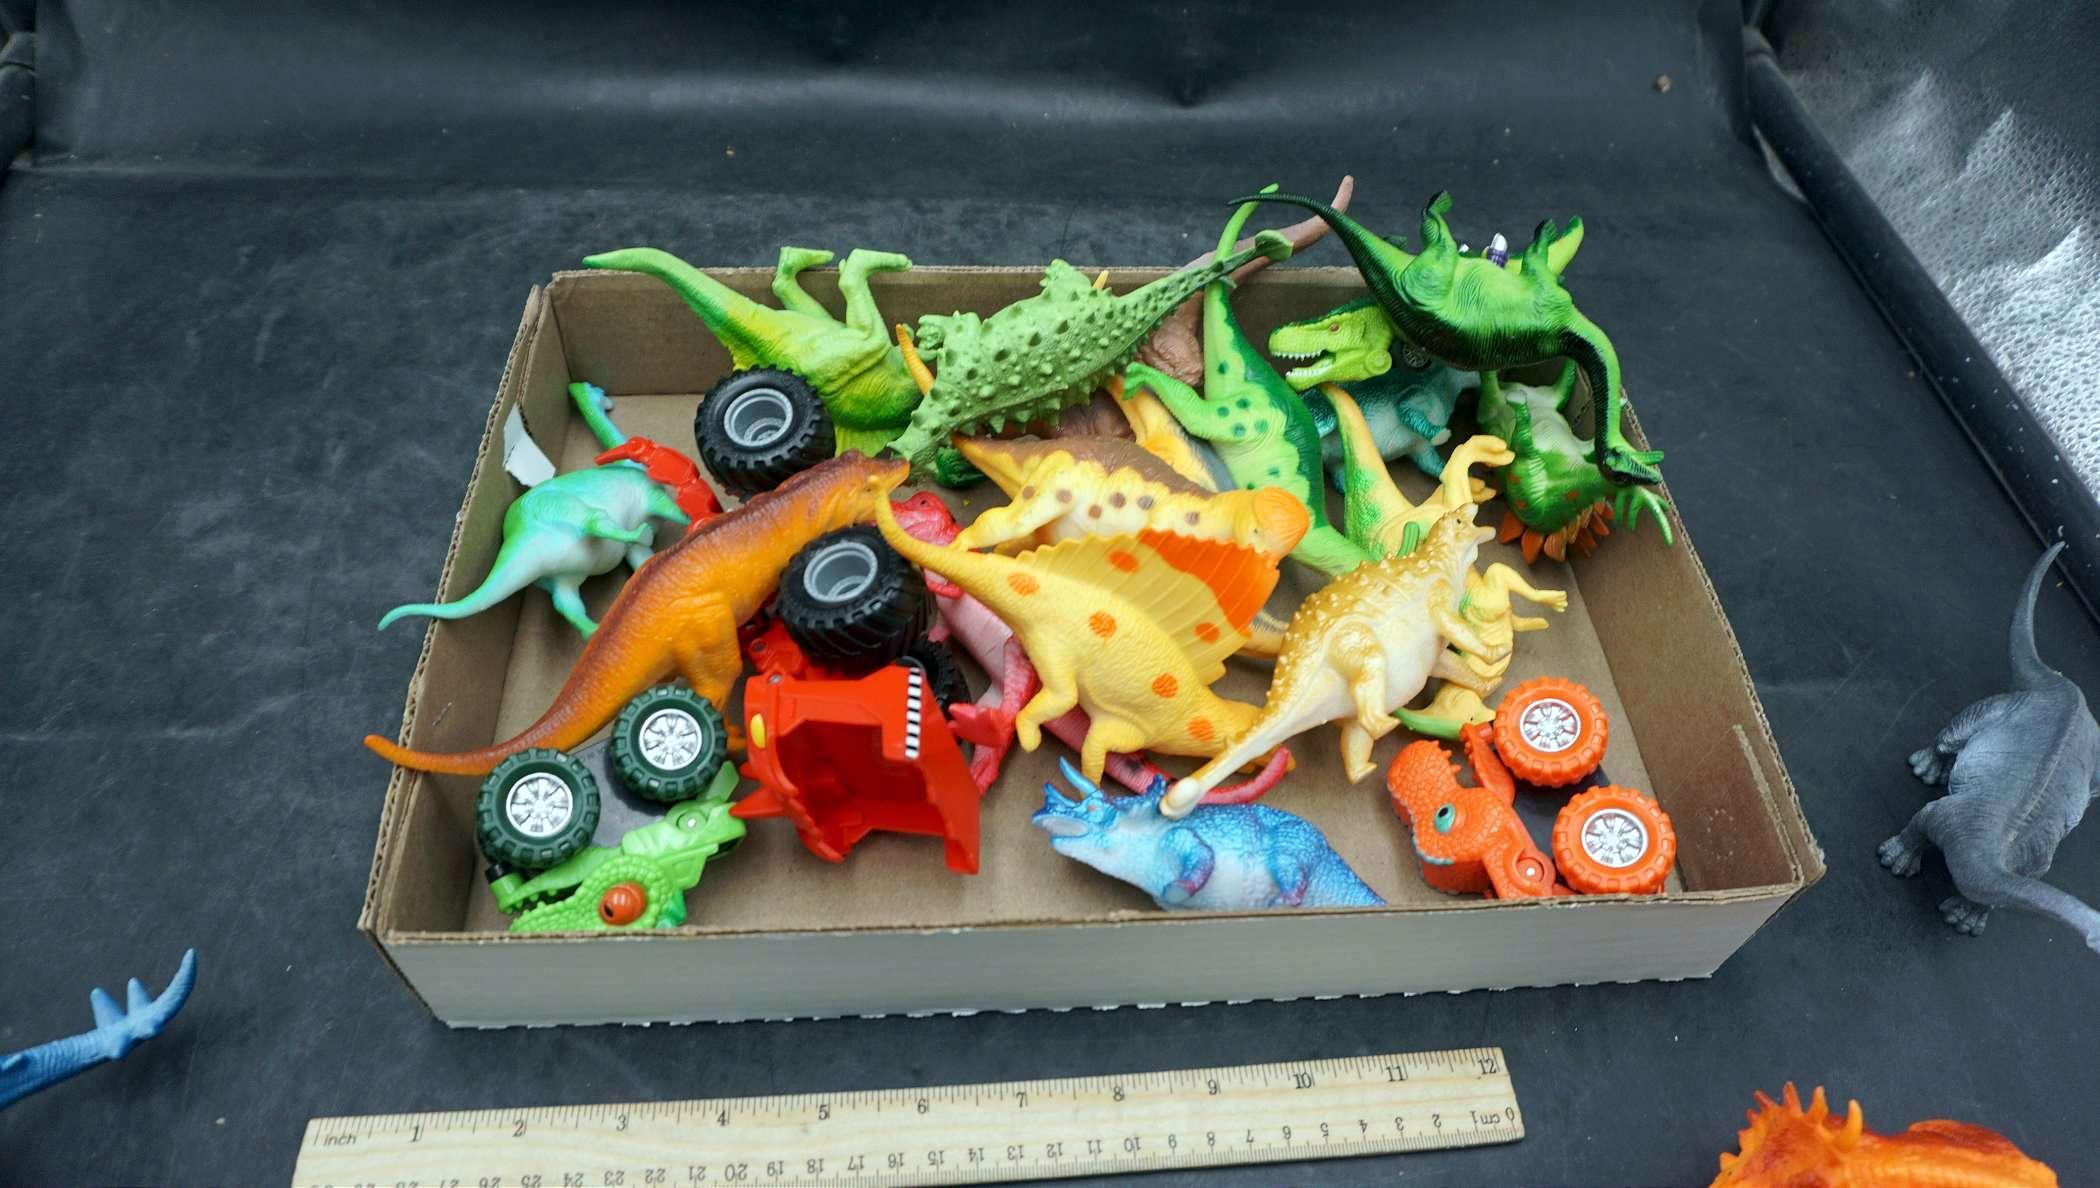 Toy Dinosaurs & Truck